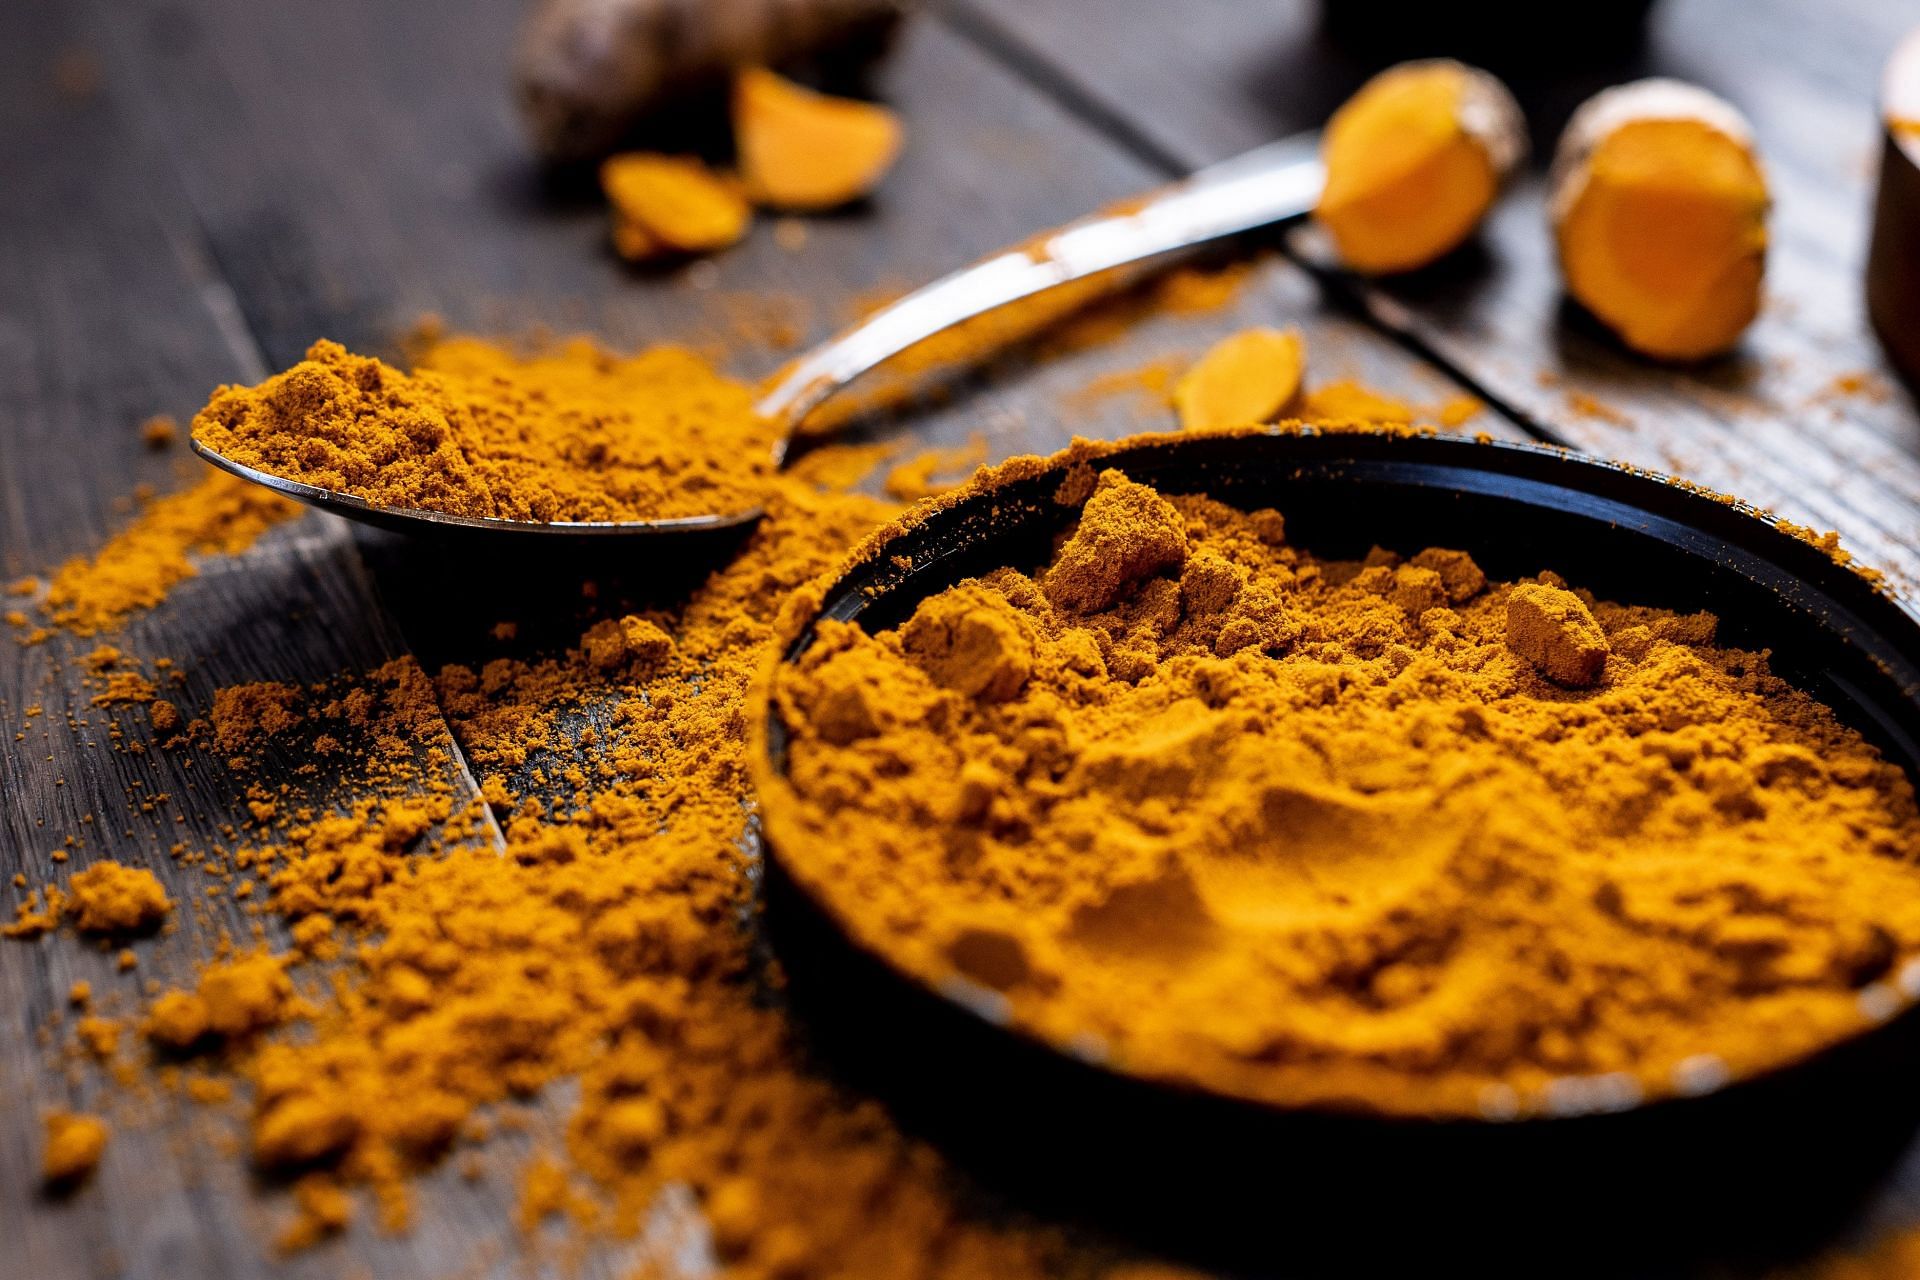 Turmeric is a superfood that can be used as a home remedy to treat your diarrhea. (Image via Pexels/Karl Solano)